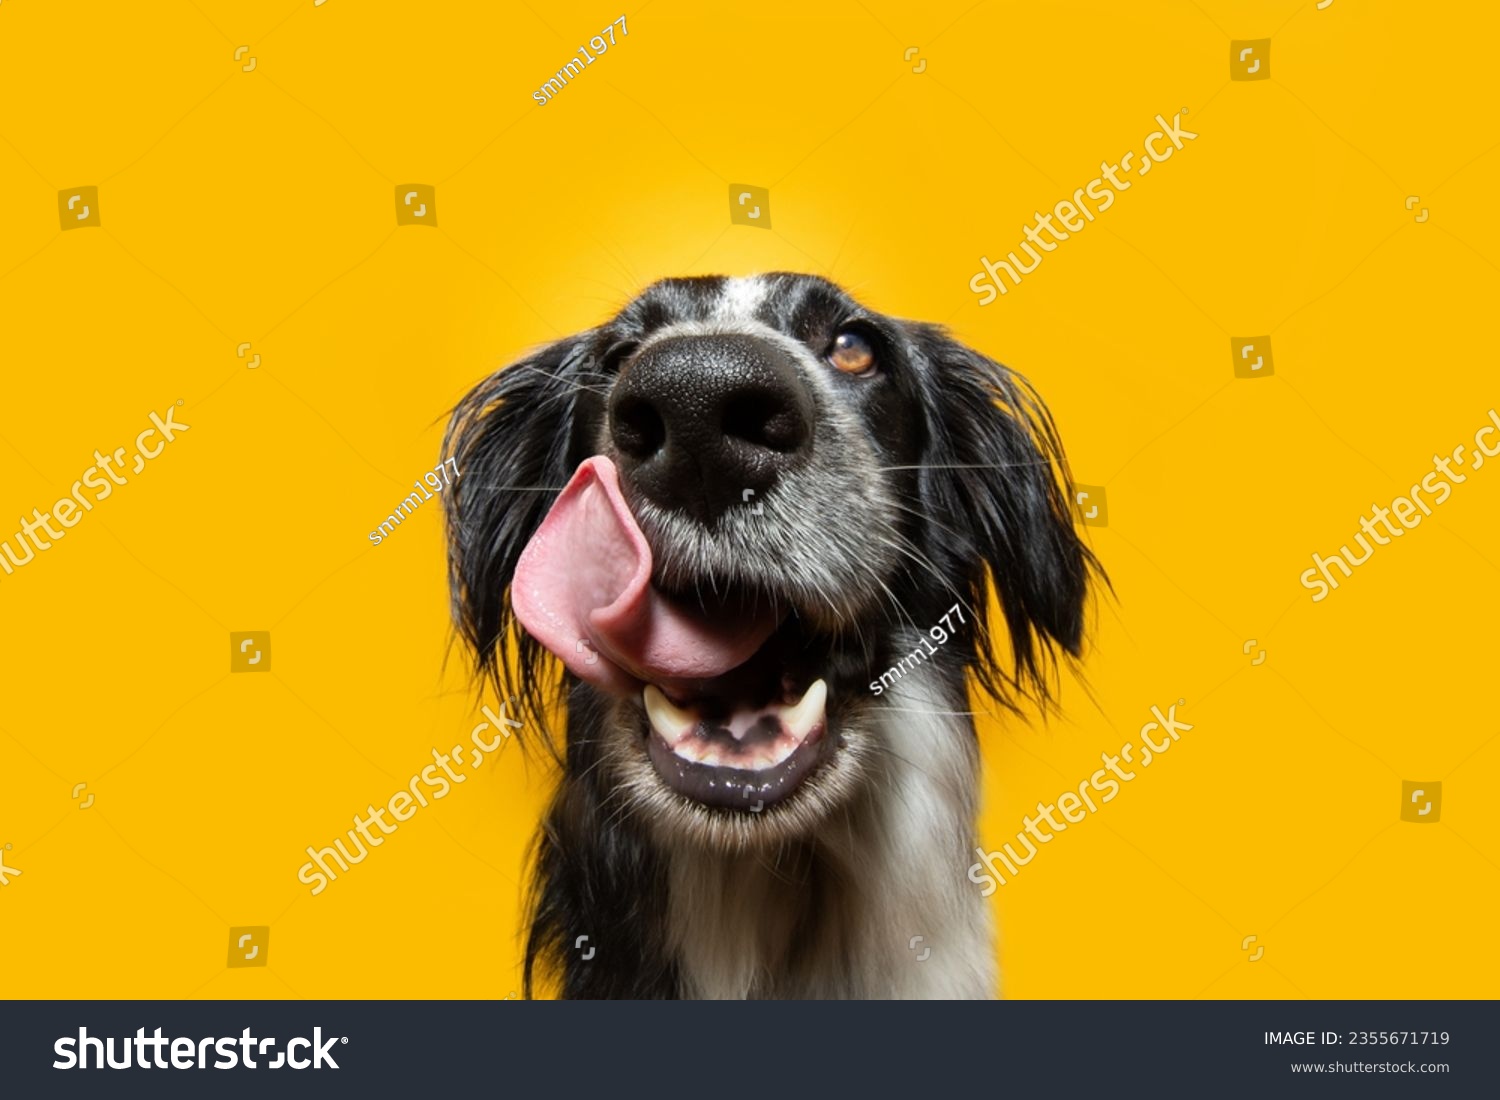 Close-up hungry puppy dog eating licking its lips with tongue. Isolated on yellow background #2355671719